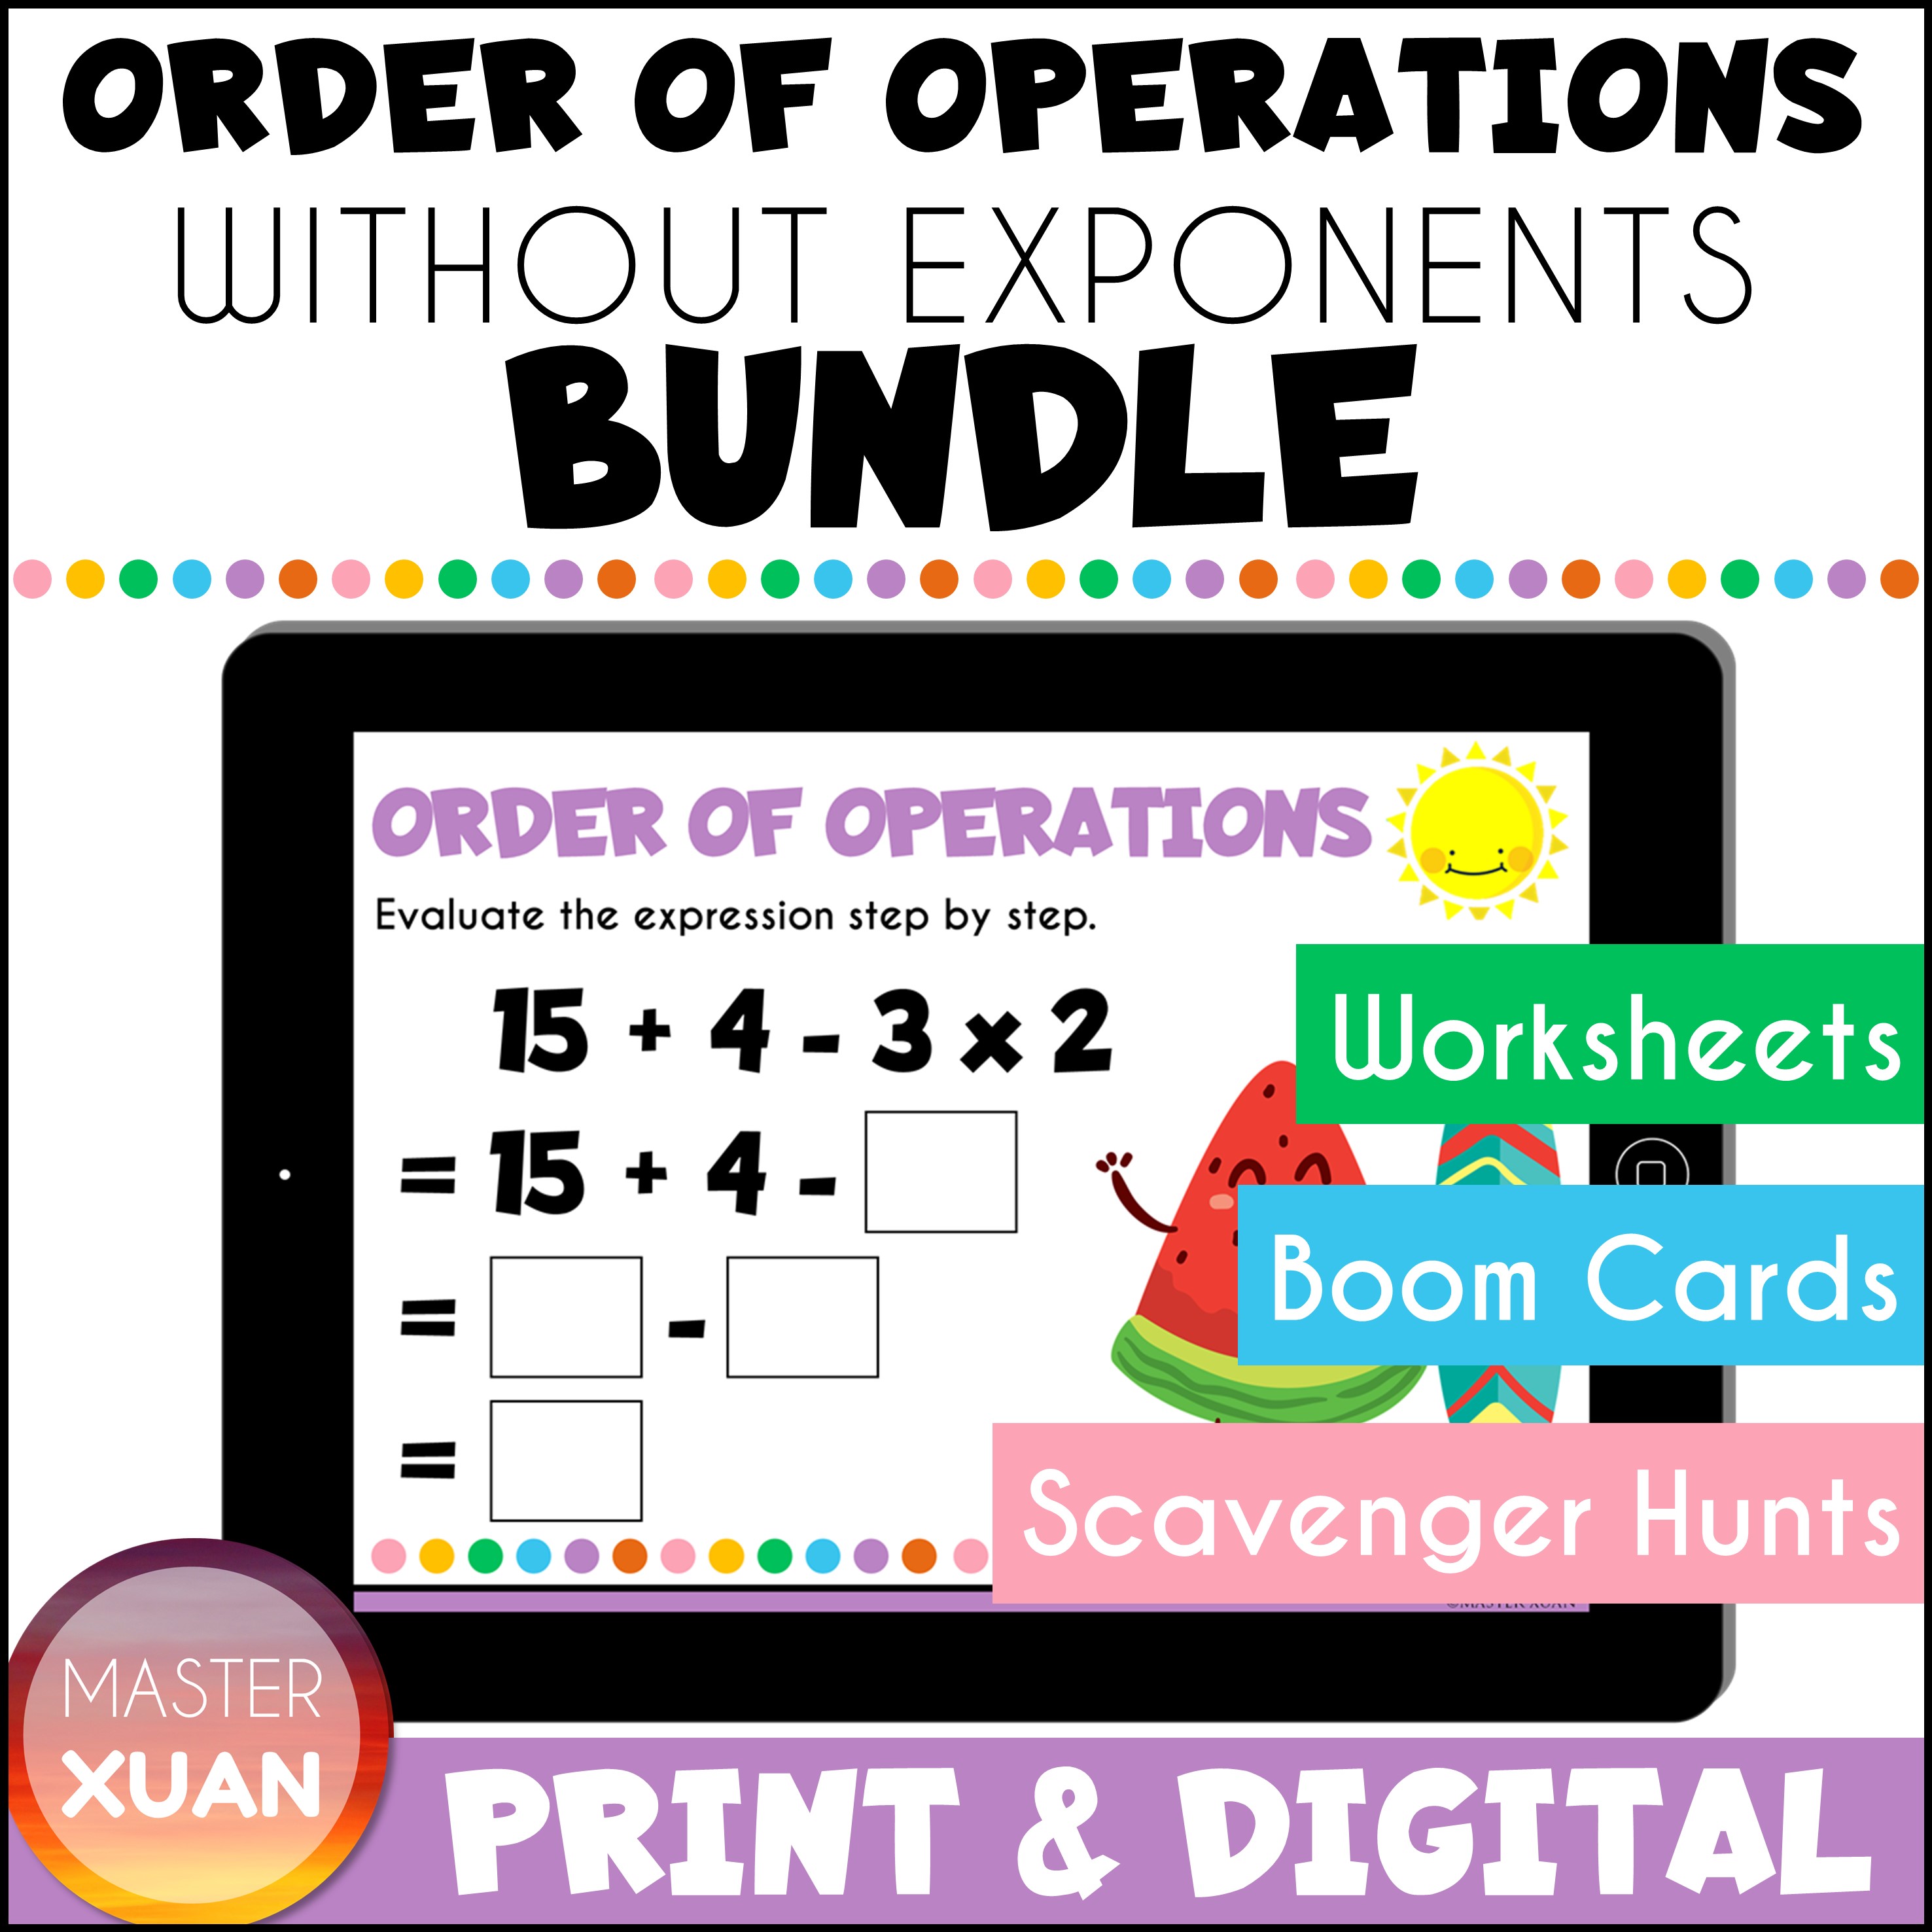 solve order of operations in math problems in this bundle